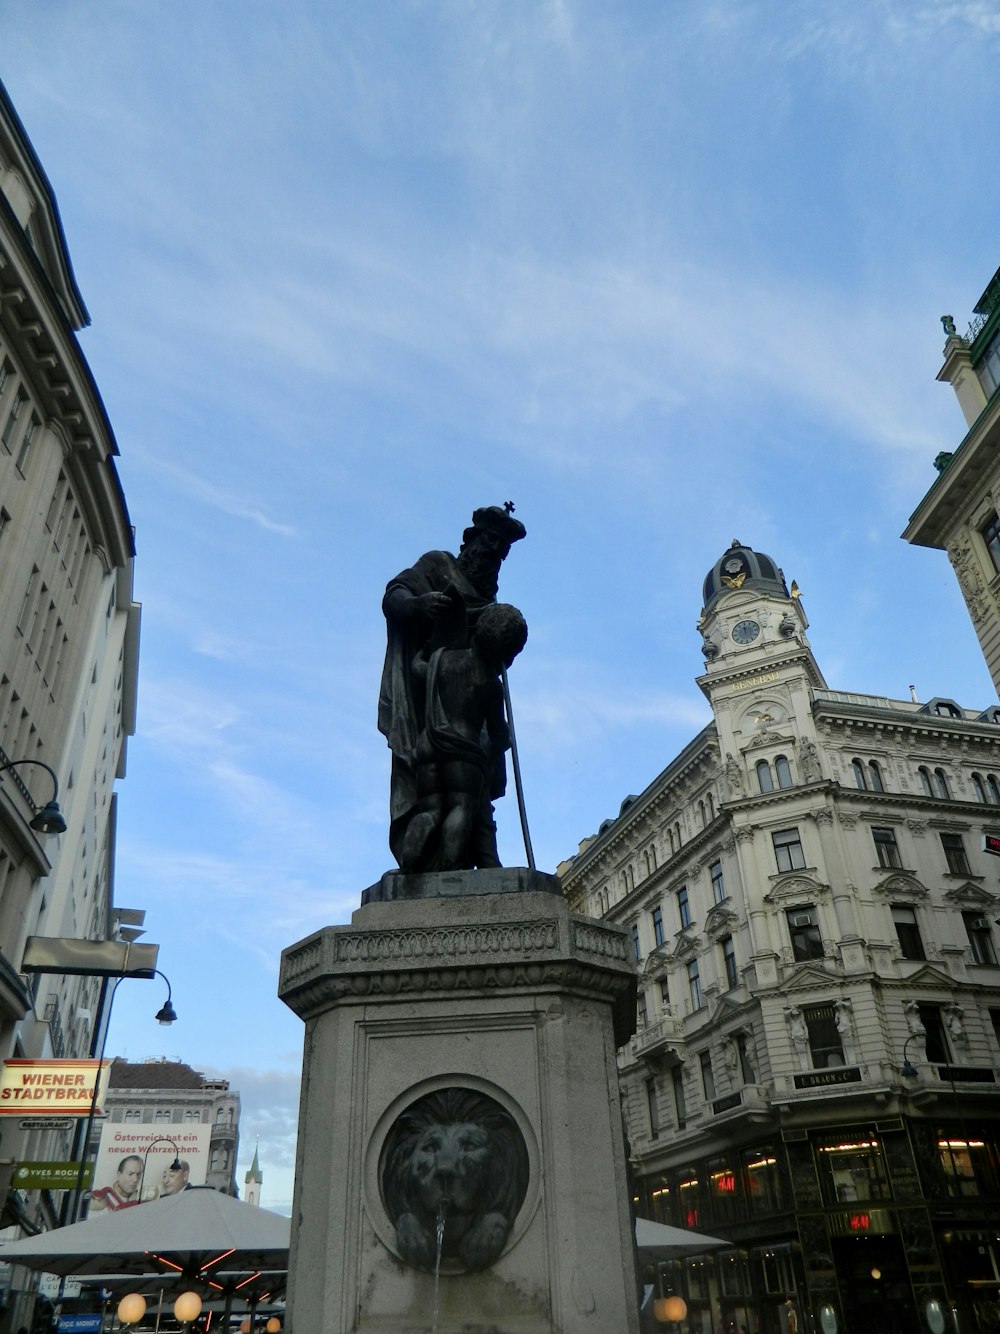 a statue of a person on a horse in a city